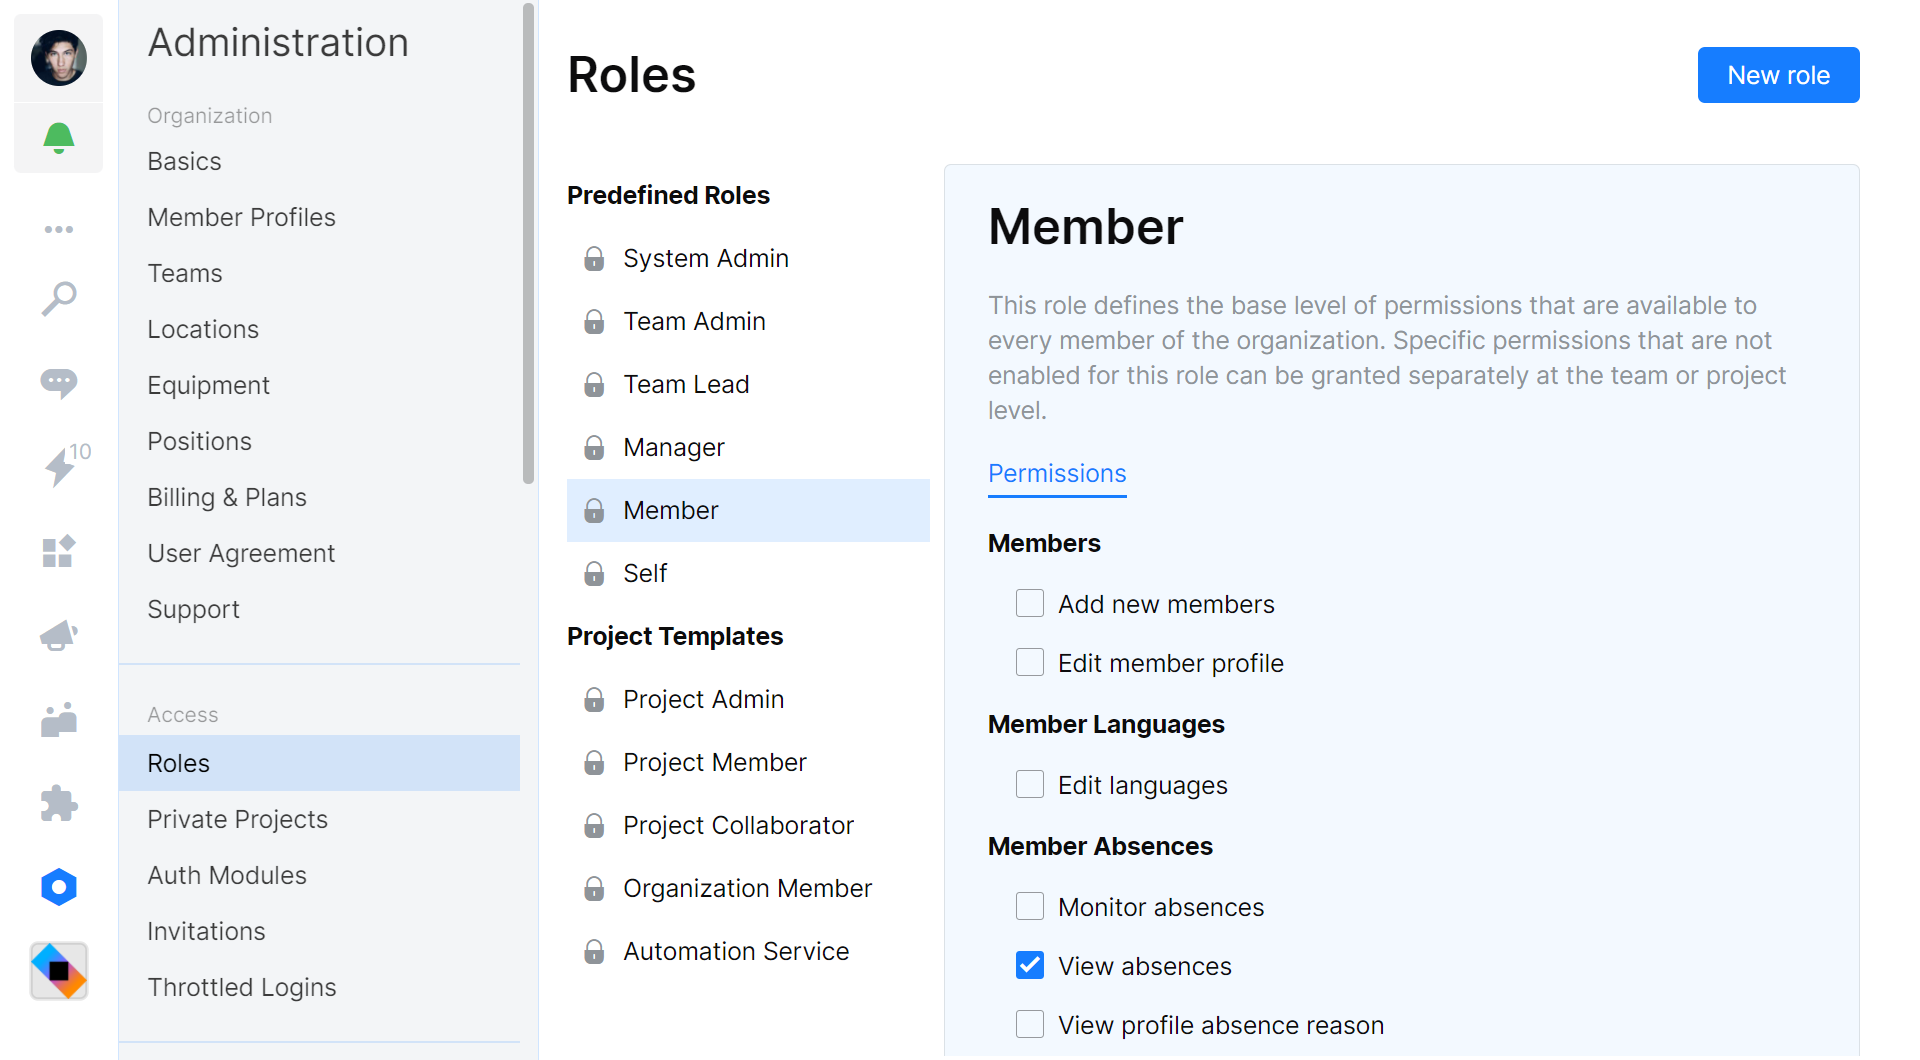 Manage roles and permissions in JetBrains Space